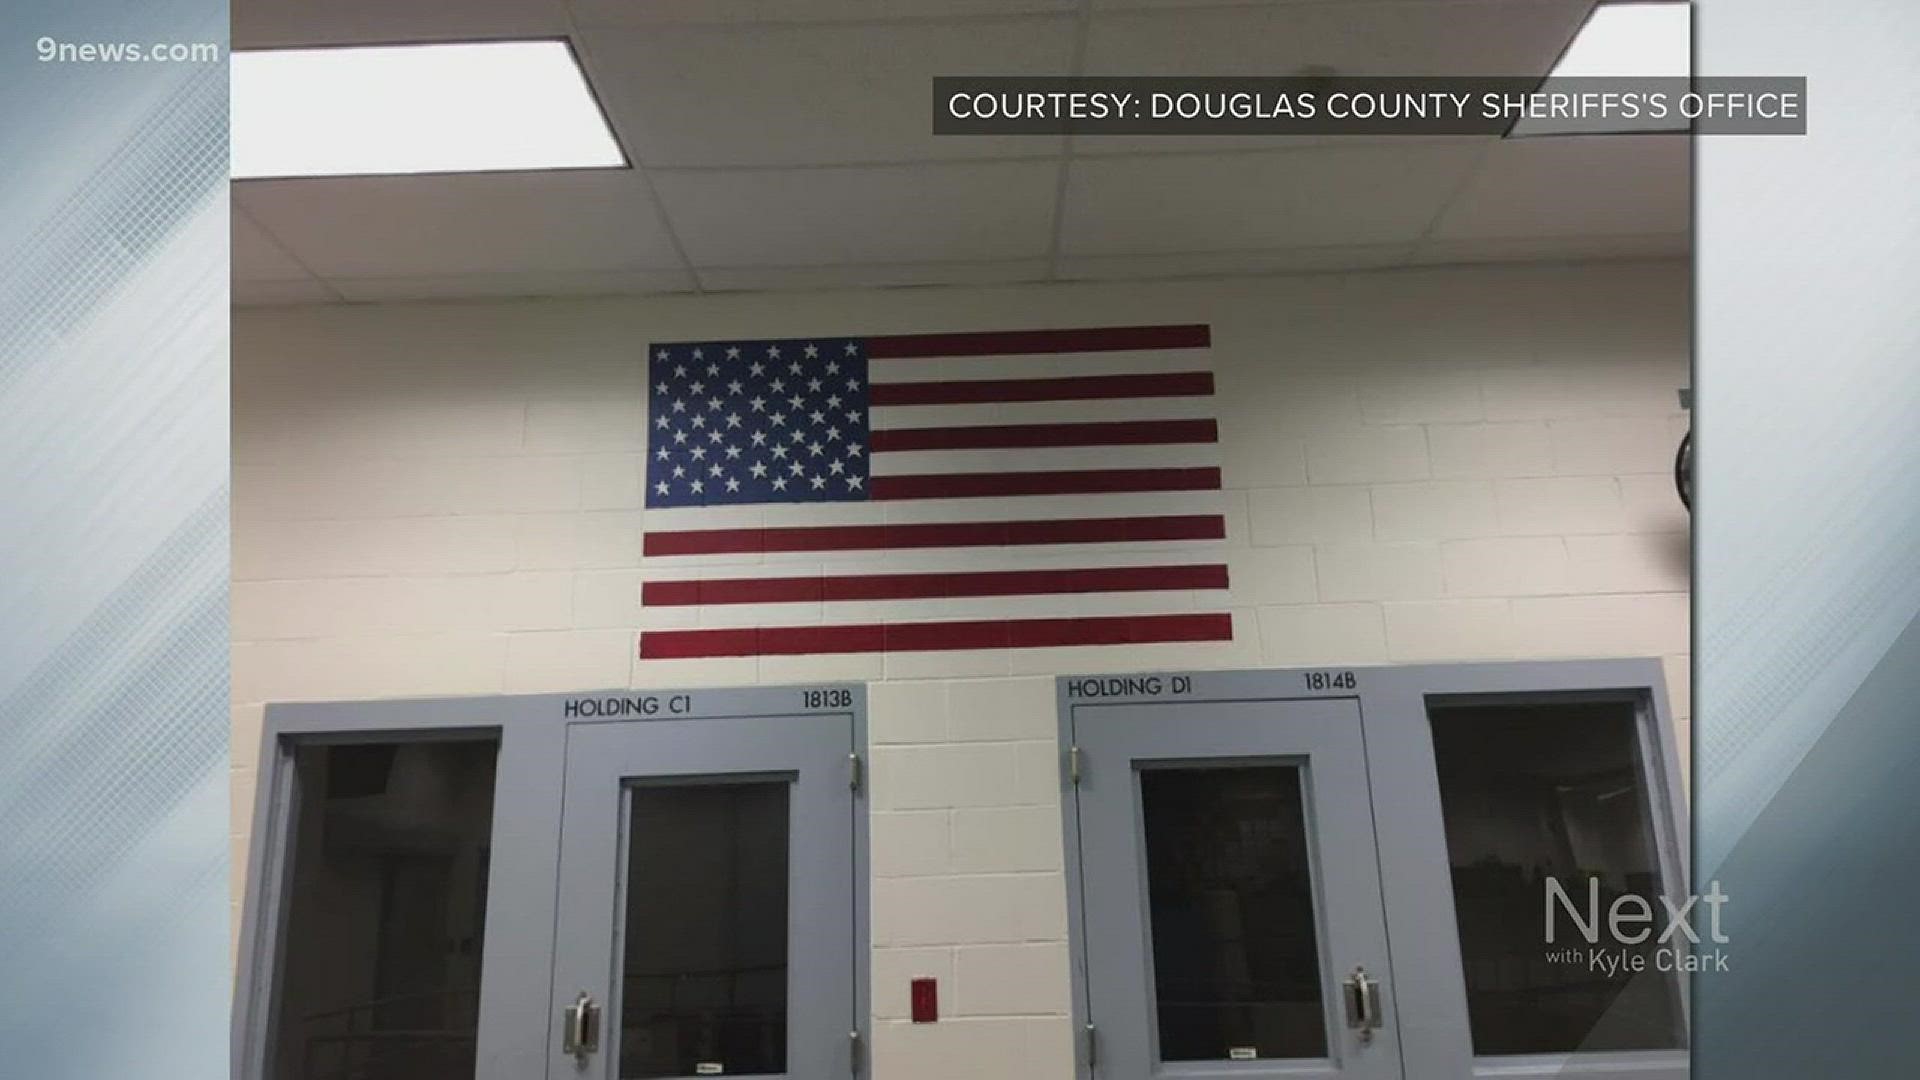 The inmate painted an american flag and a heroes flag in the jail's booking area. Captain Darren Weekly shared the photos of the inmate's art on Twitter.